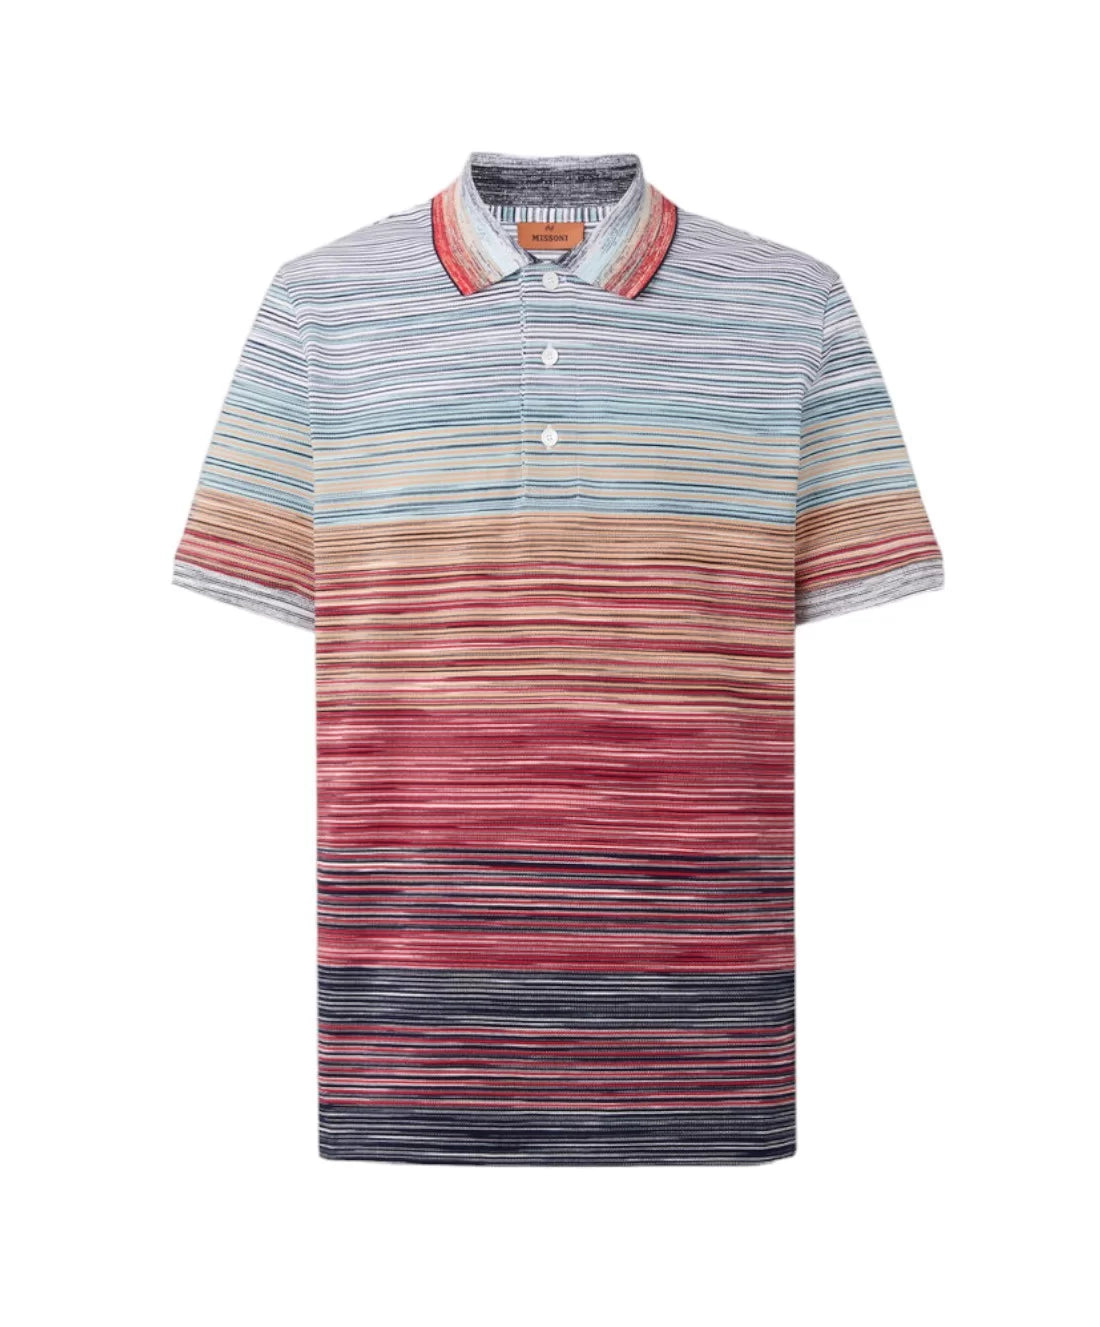 Missoni Men’s Knitted Stripe Polo Shirt Multicoloured - Front View